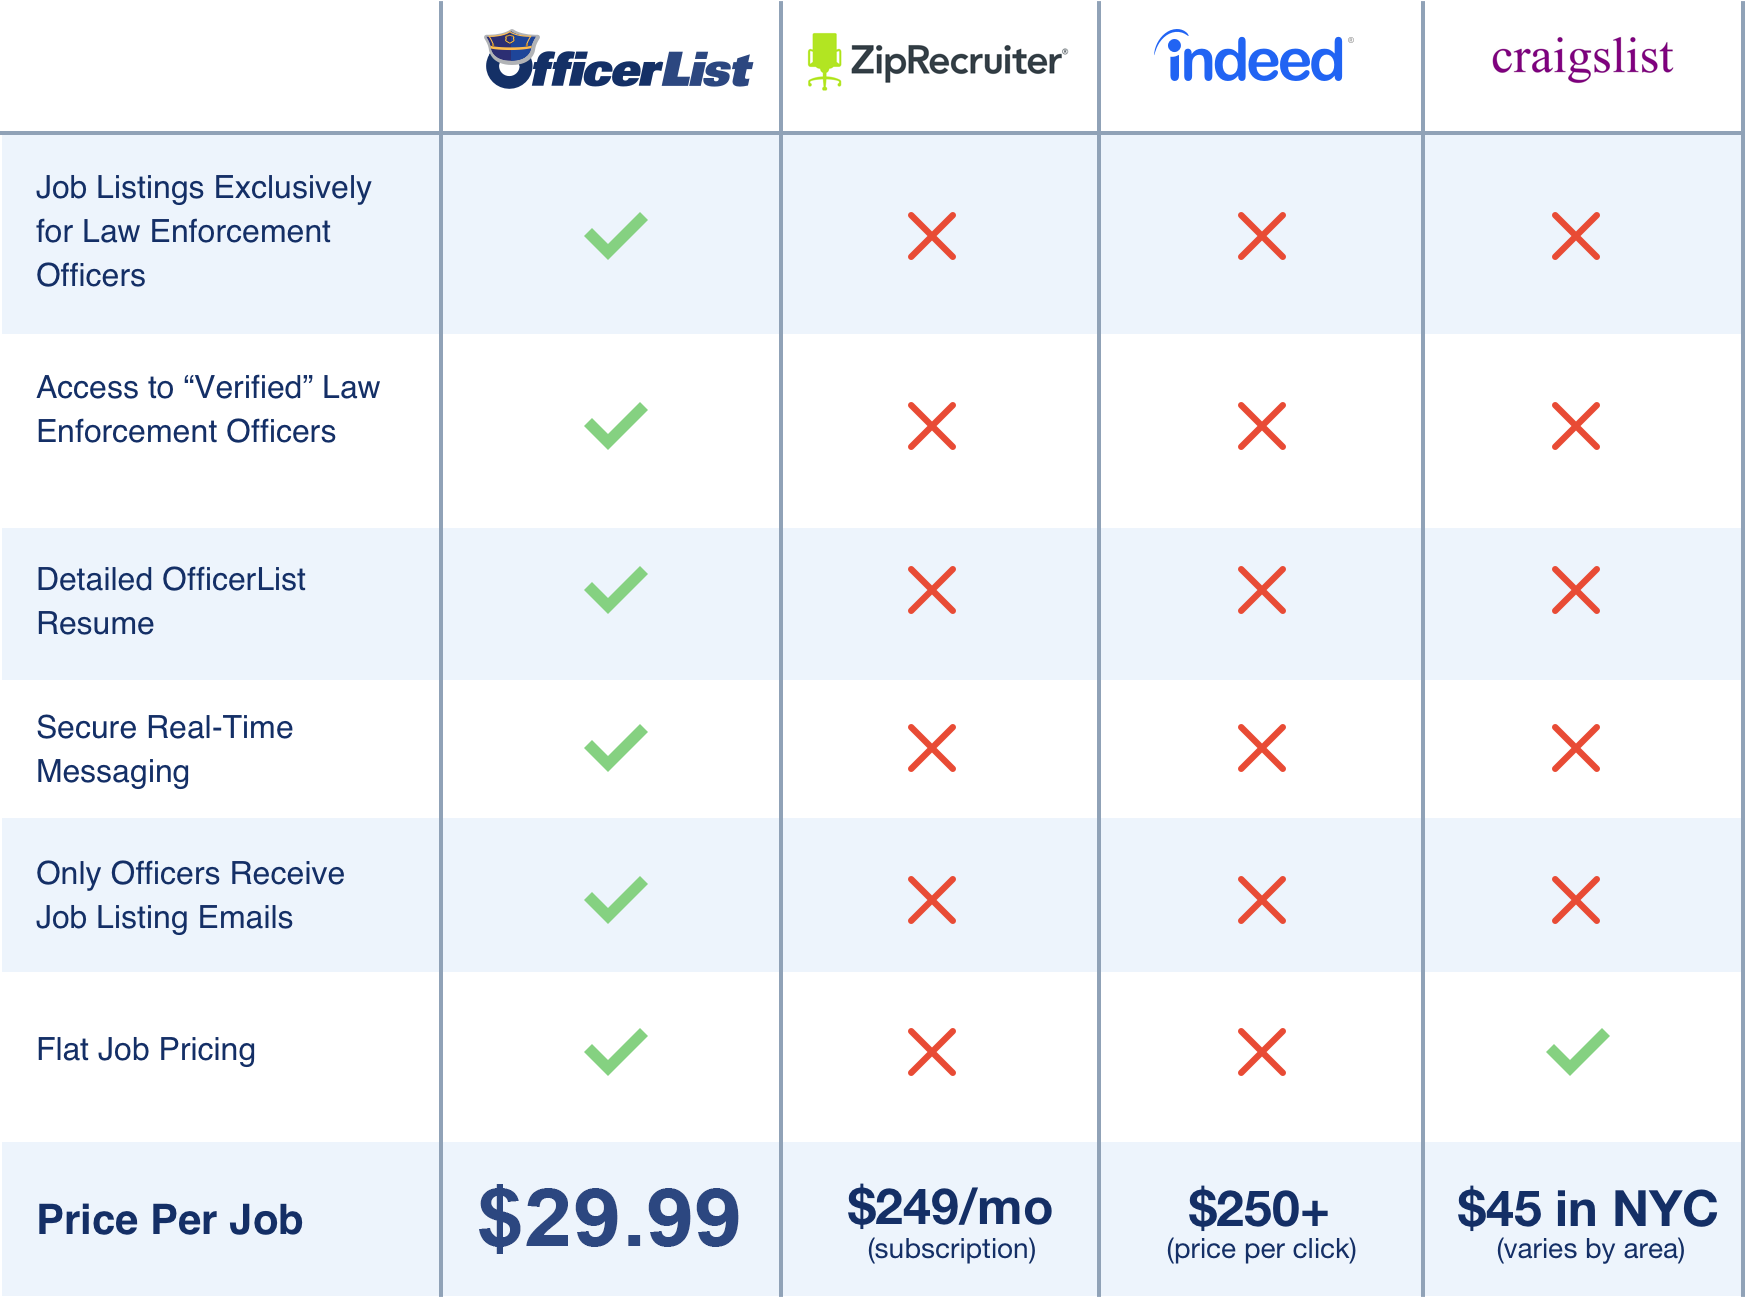 OfficerList pricing for employers is only $20 a job, compared to Indeed, LinkedIn, and Craigslist.